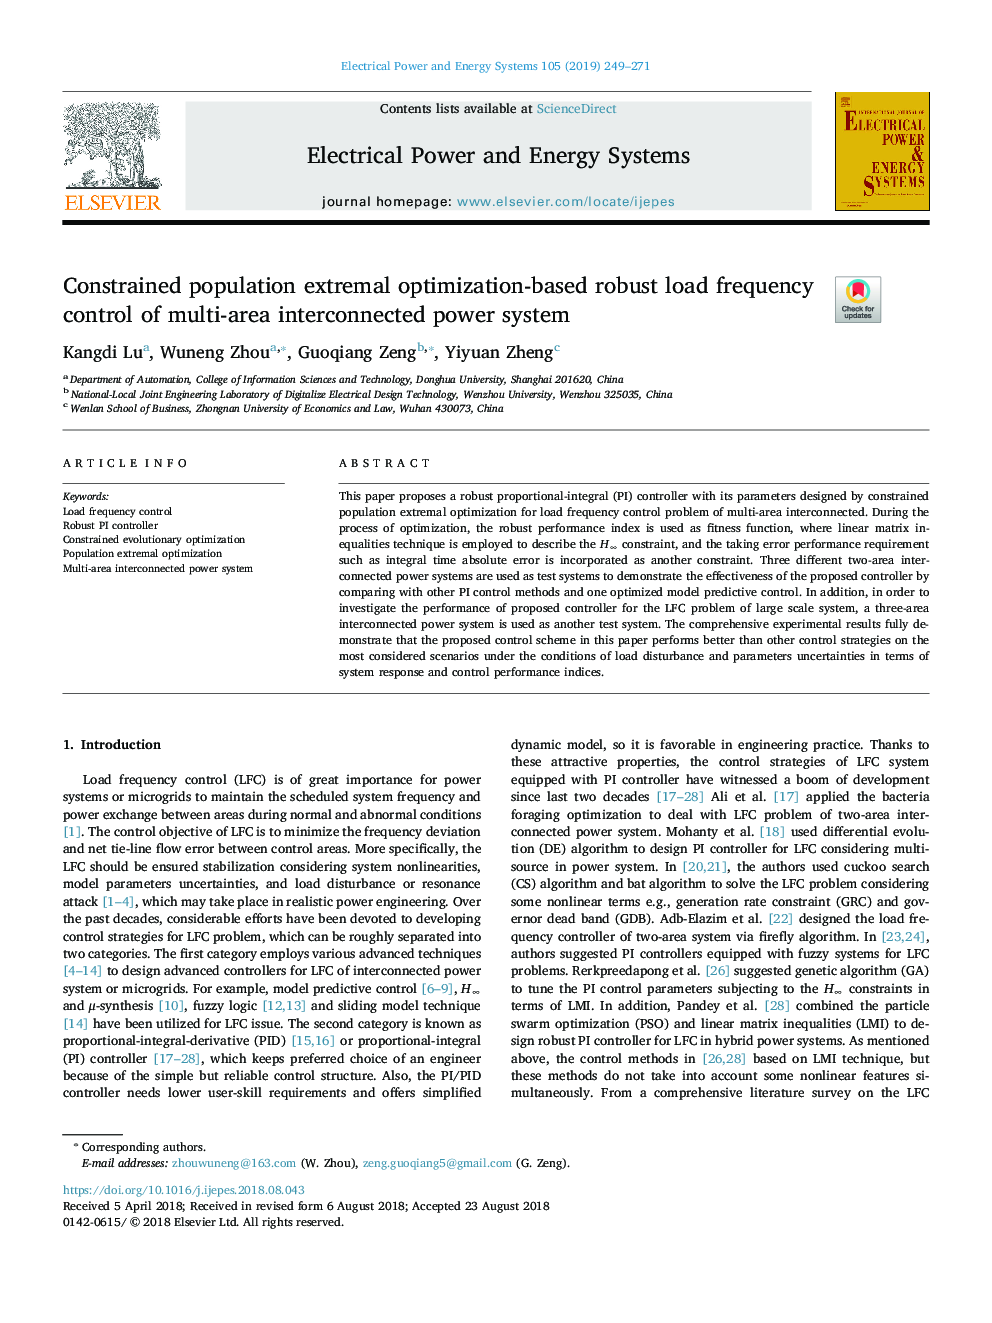 Constrained population extremal optimization-based robust load frequency control of multi-area interconnected power system